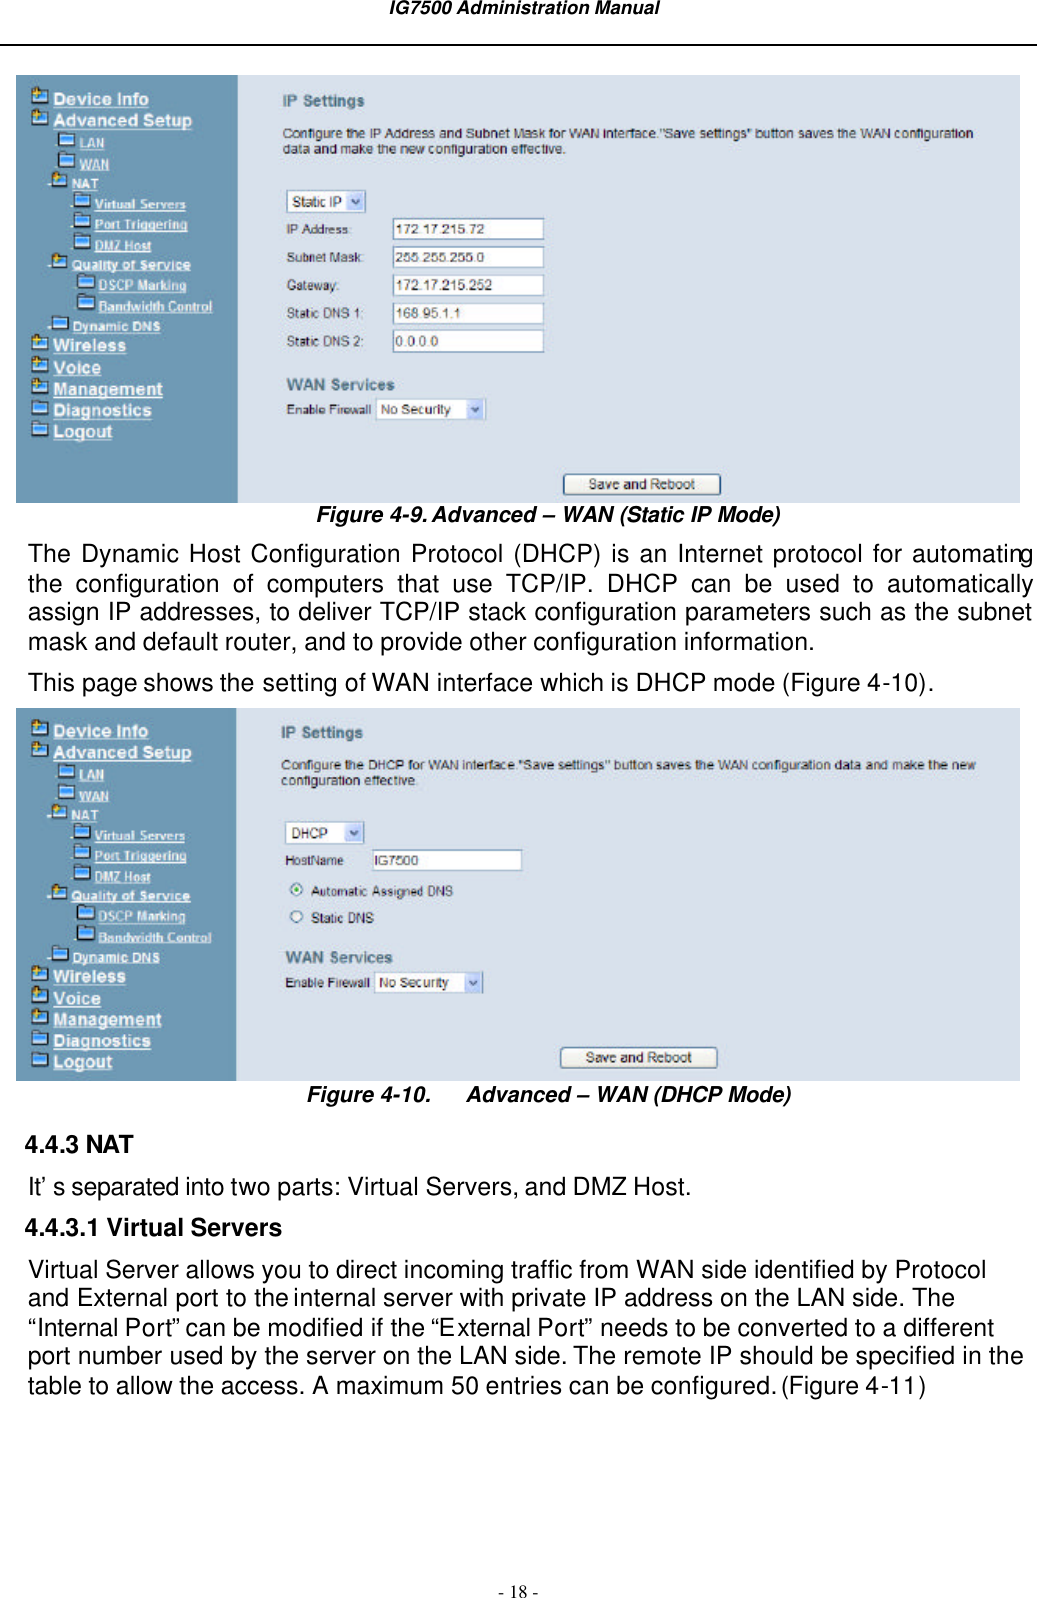  IG7500 Administration Manual  - 18 -  Figure 4-9. Advanced – WAN (Static IP Mode) The Dynamic Host Configuration Protocol (DHCP) is an Internet protocol for automating the configuration of computers that use TCP/IP. DHCP can be used to automatically assign IP addresses, to deliver TCP/IP stack configuration parameters such as the subnet mask and default router, and to provide other configuration information. This page shows the setting of WAN interface which is DHCP mode (Figure 4-10).  Figure 4-10. Advanced – WAN (DHCP Mode) 4.4.3 NAT It’s separated into two parts: Virtual Servers, and DMZ Host. 4.4.3.1 Virtual Servers Virtual Server allows you to direct incoming traffic from WAN side identified by Protocol and External port to the internal server with private IP address on the LAN side. The “Internal Port” can be modified if the “External Port” needs to be converted to a different port number used by the server on the LAN side. The remote IP should be specified in the table to allow the access. A maximum 50 entries can be configured. (Figure 4-11) 